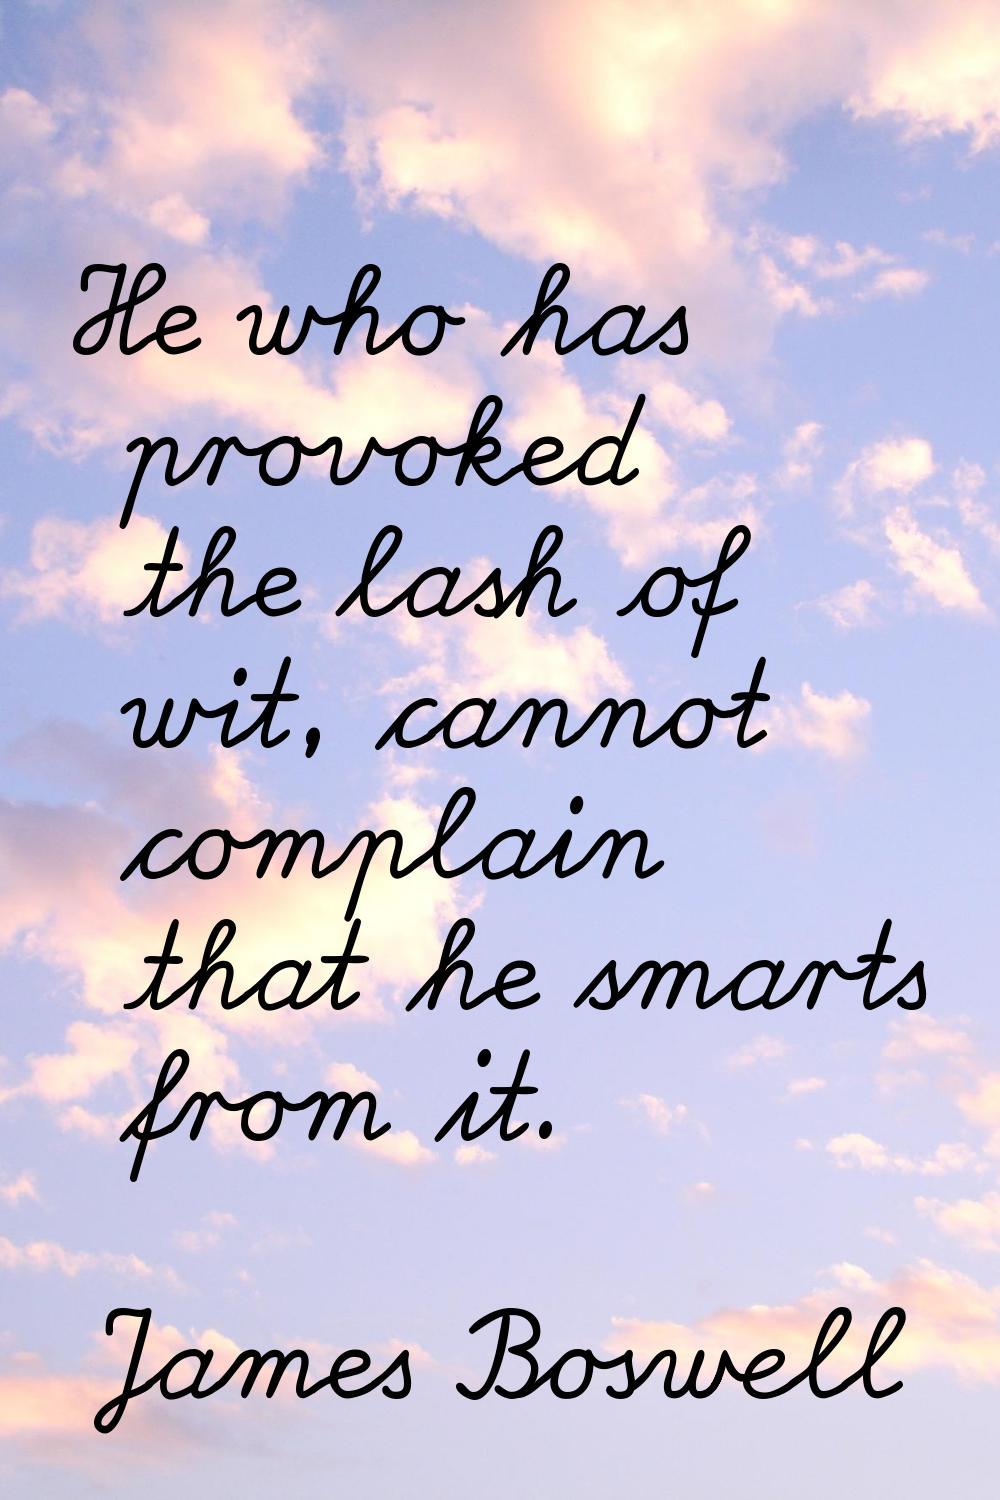 He who has provoked the lash of wit, cannot complain that he smarts from it.